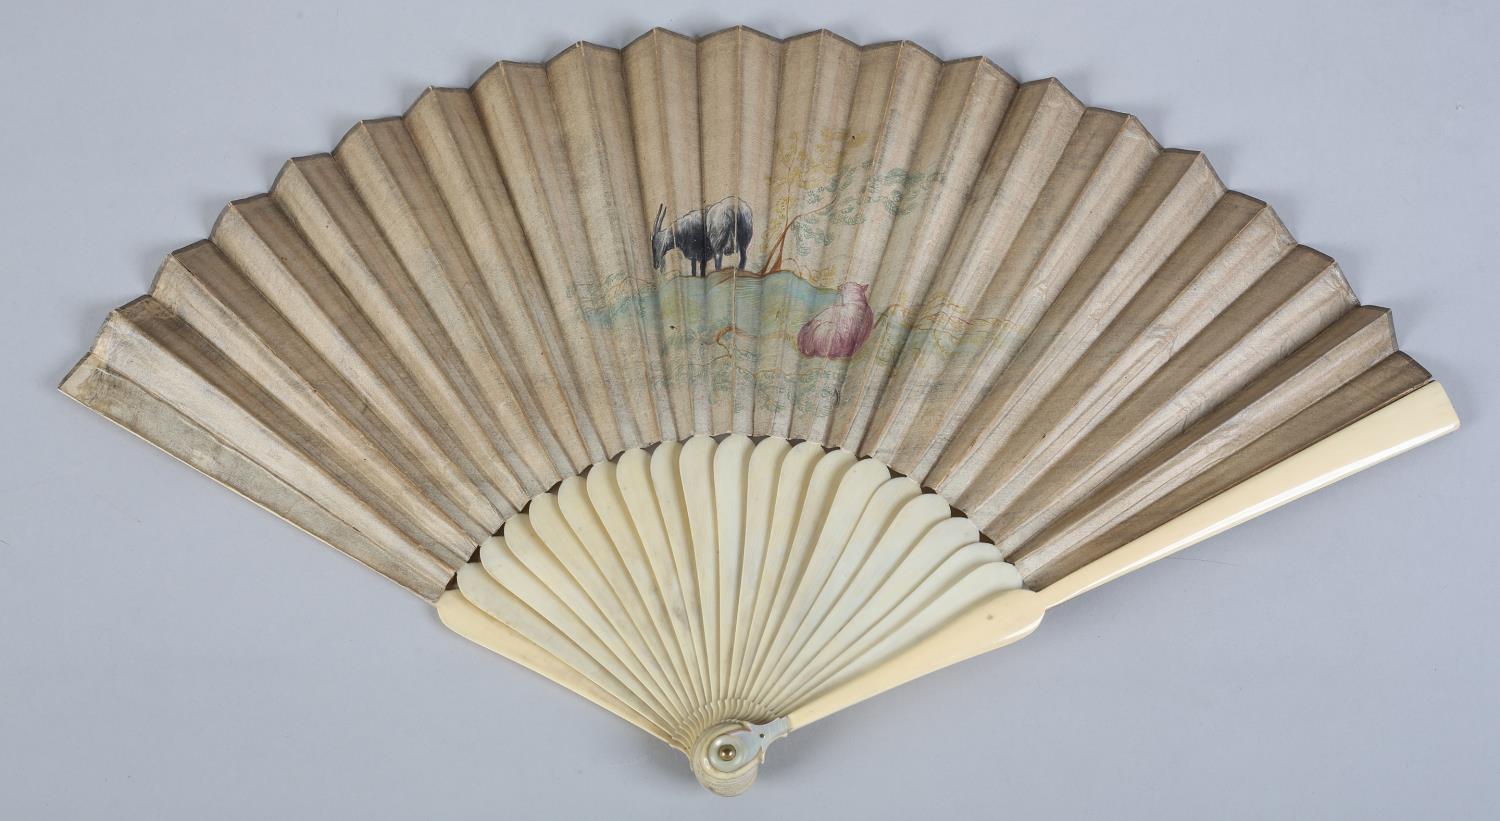 An 18th century ivory fan, the head fairly bulbous and fitted with a mother of pearl thumb guard, - Image 4 of 5